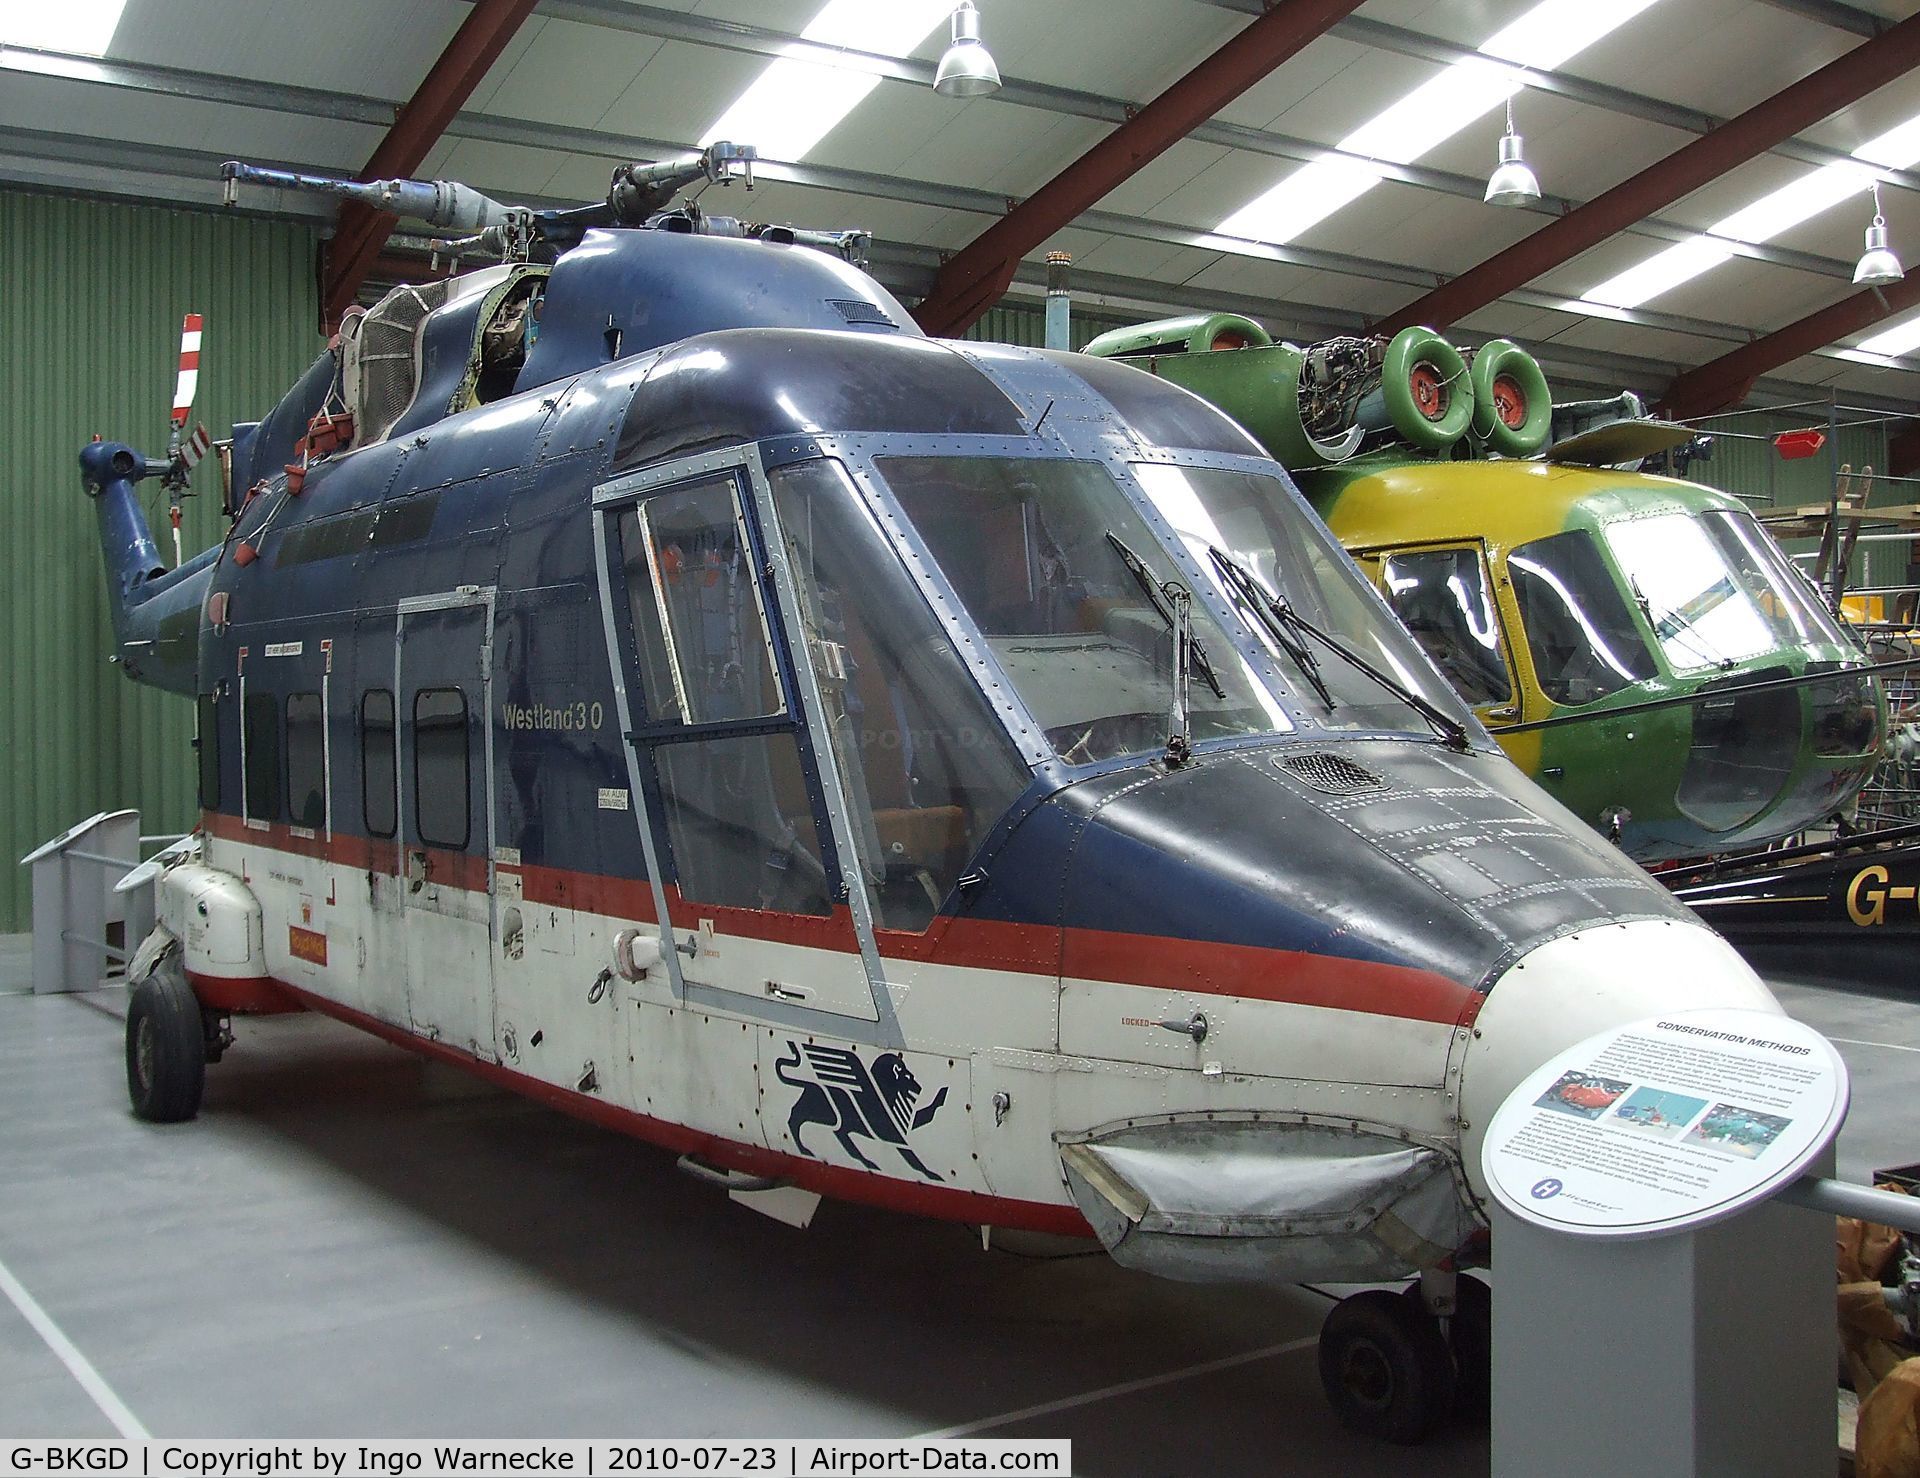 G-BKGD, 1982 Westland WG-30-100 C/N 002, Westland 30-100 at the Helicopter Museum, Weston-super-Mare